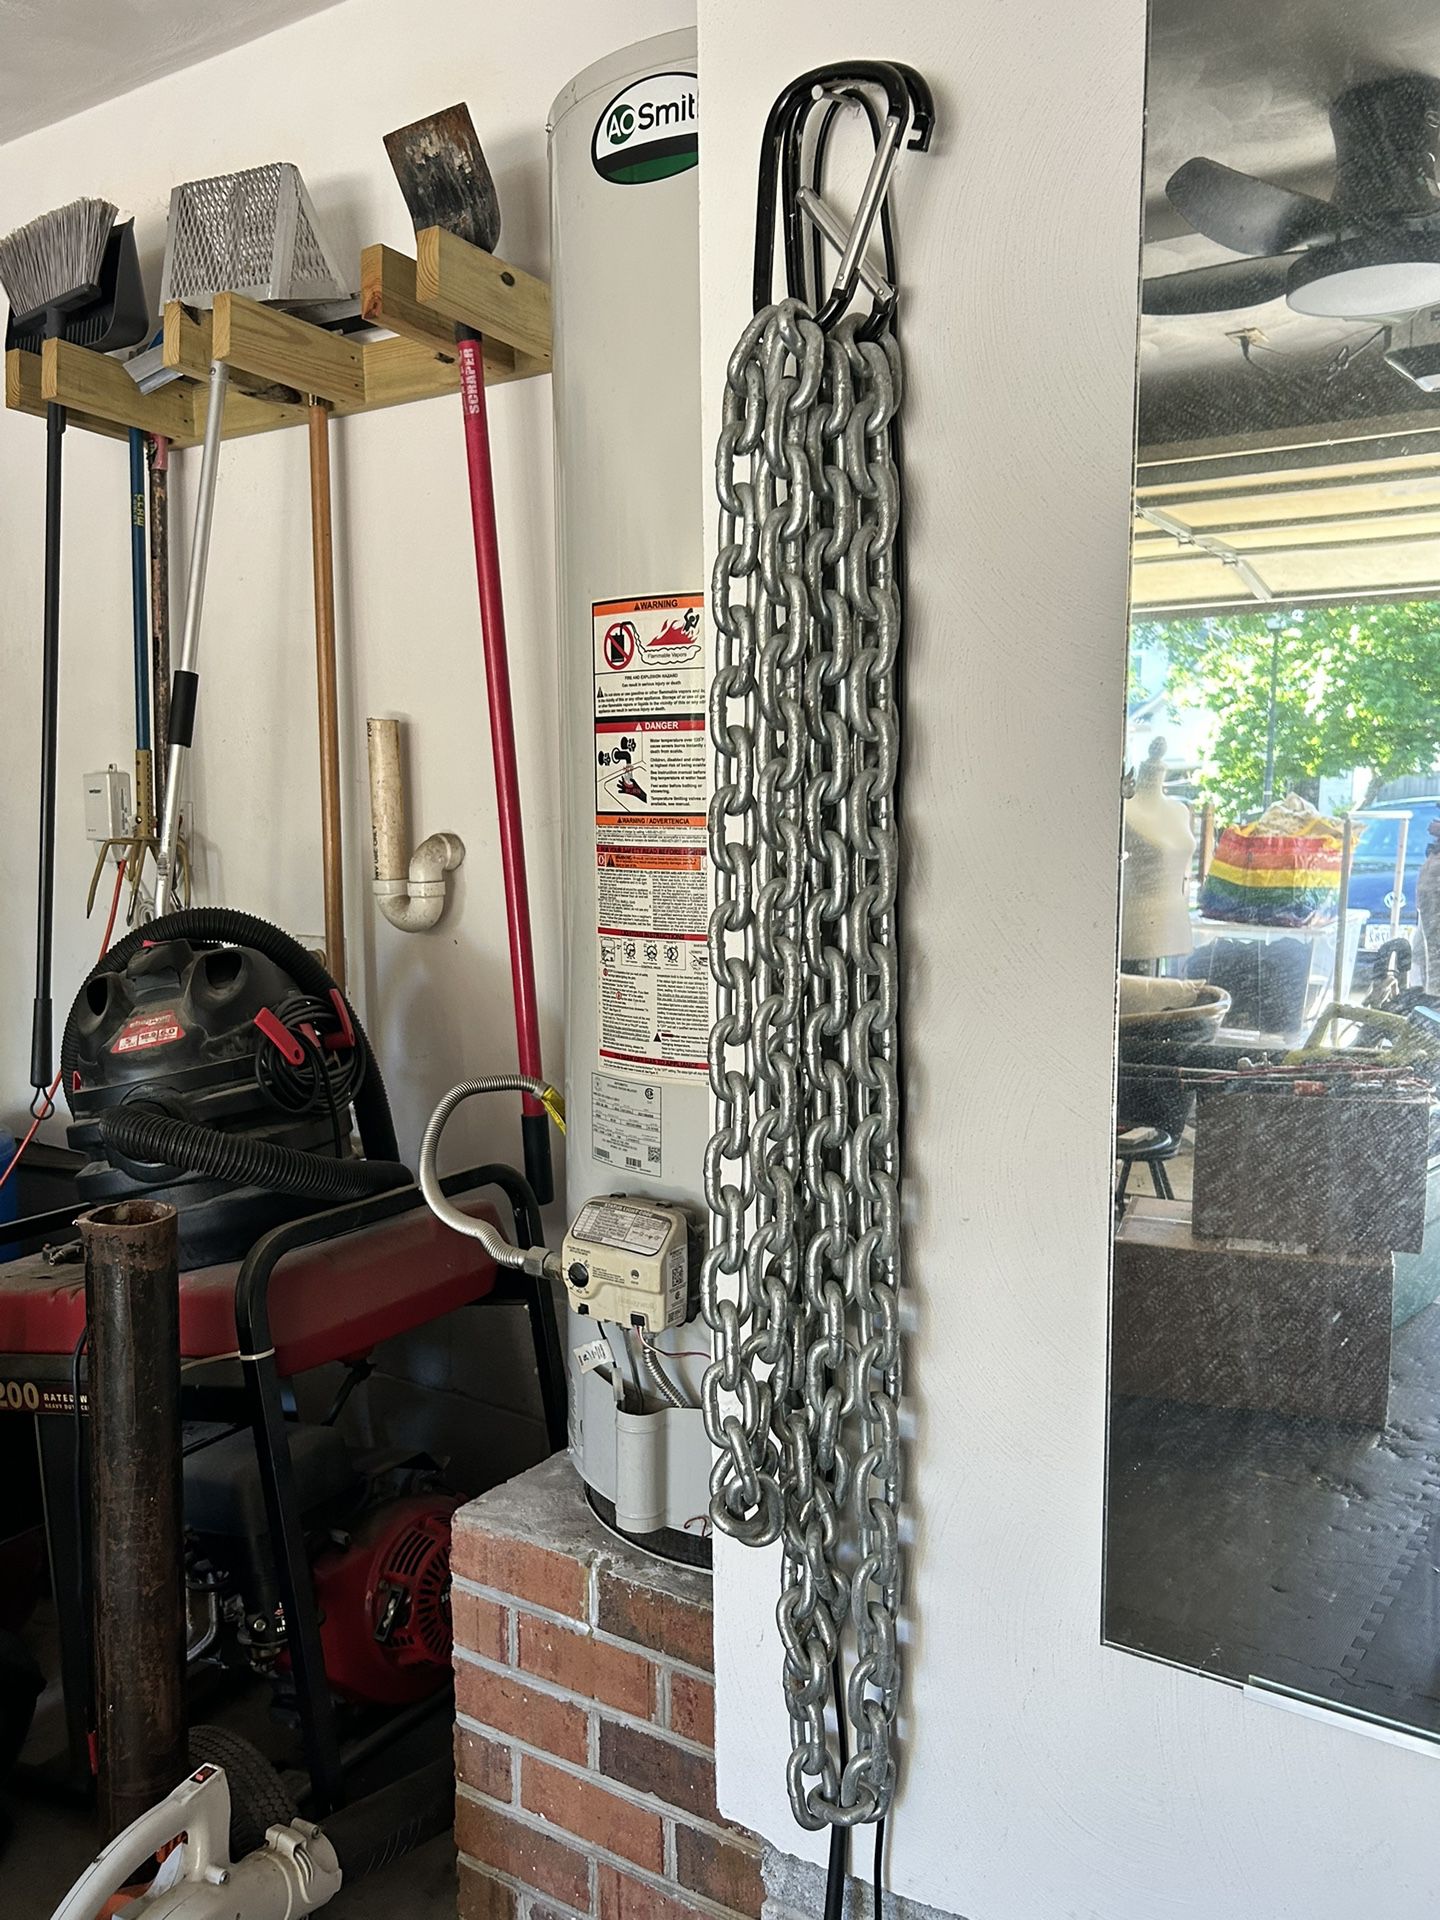 Crossfit Chains / Home Gym Mirror